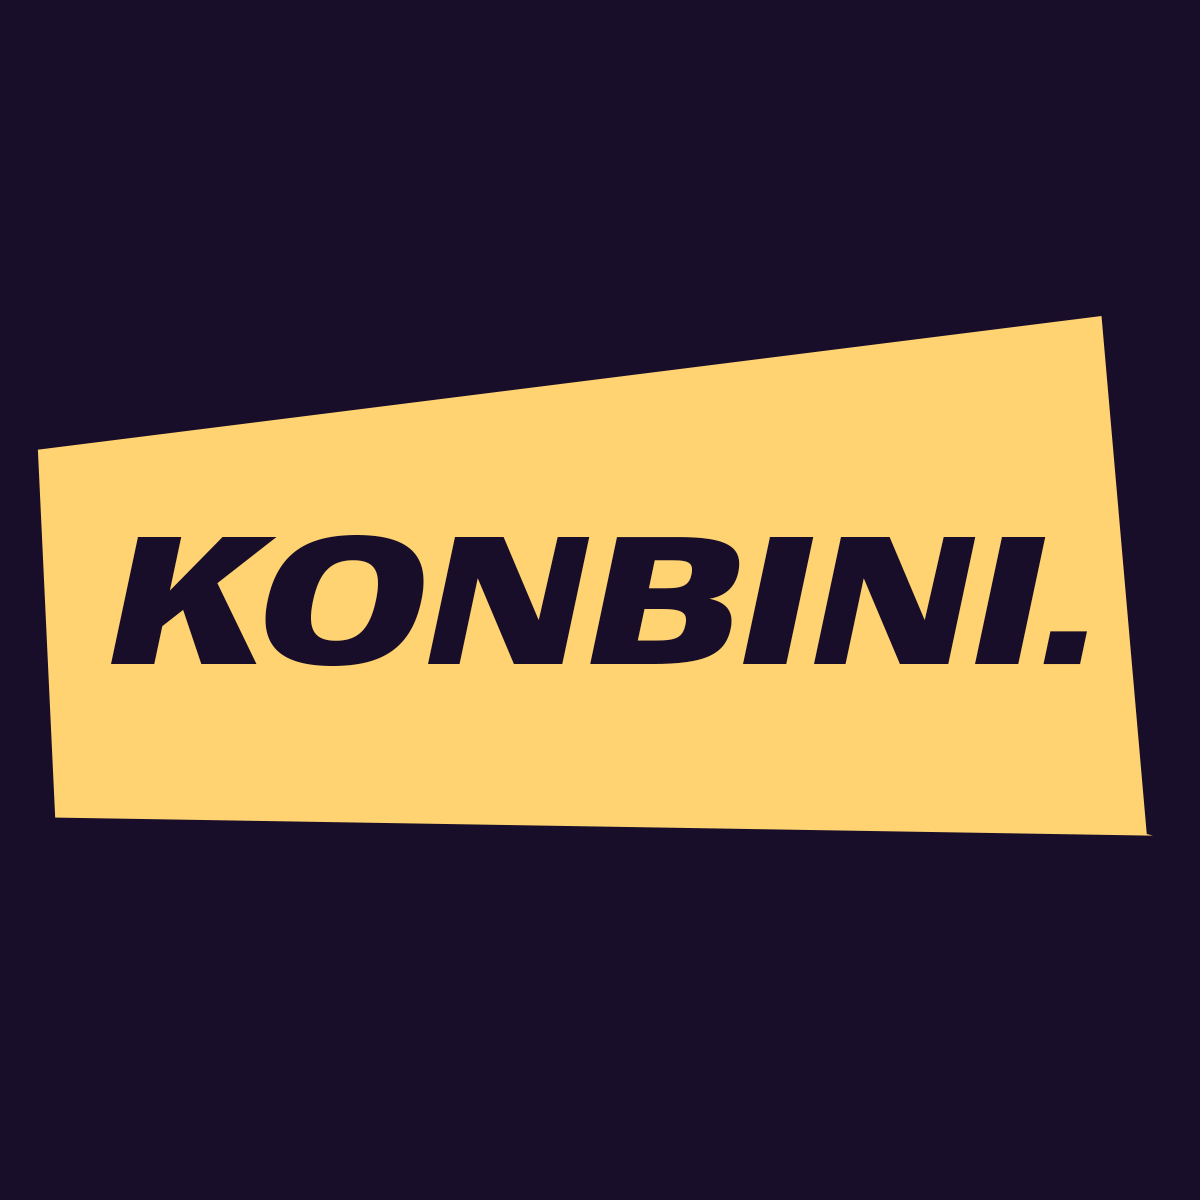 The game is afoot: Konbini